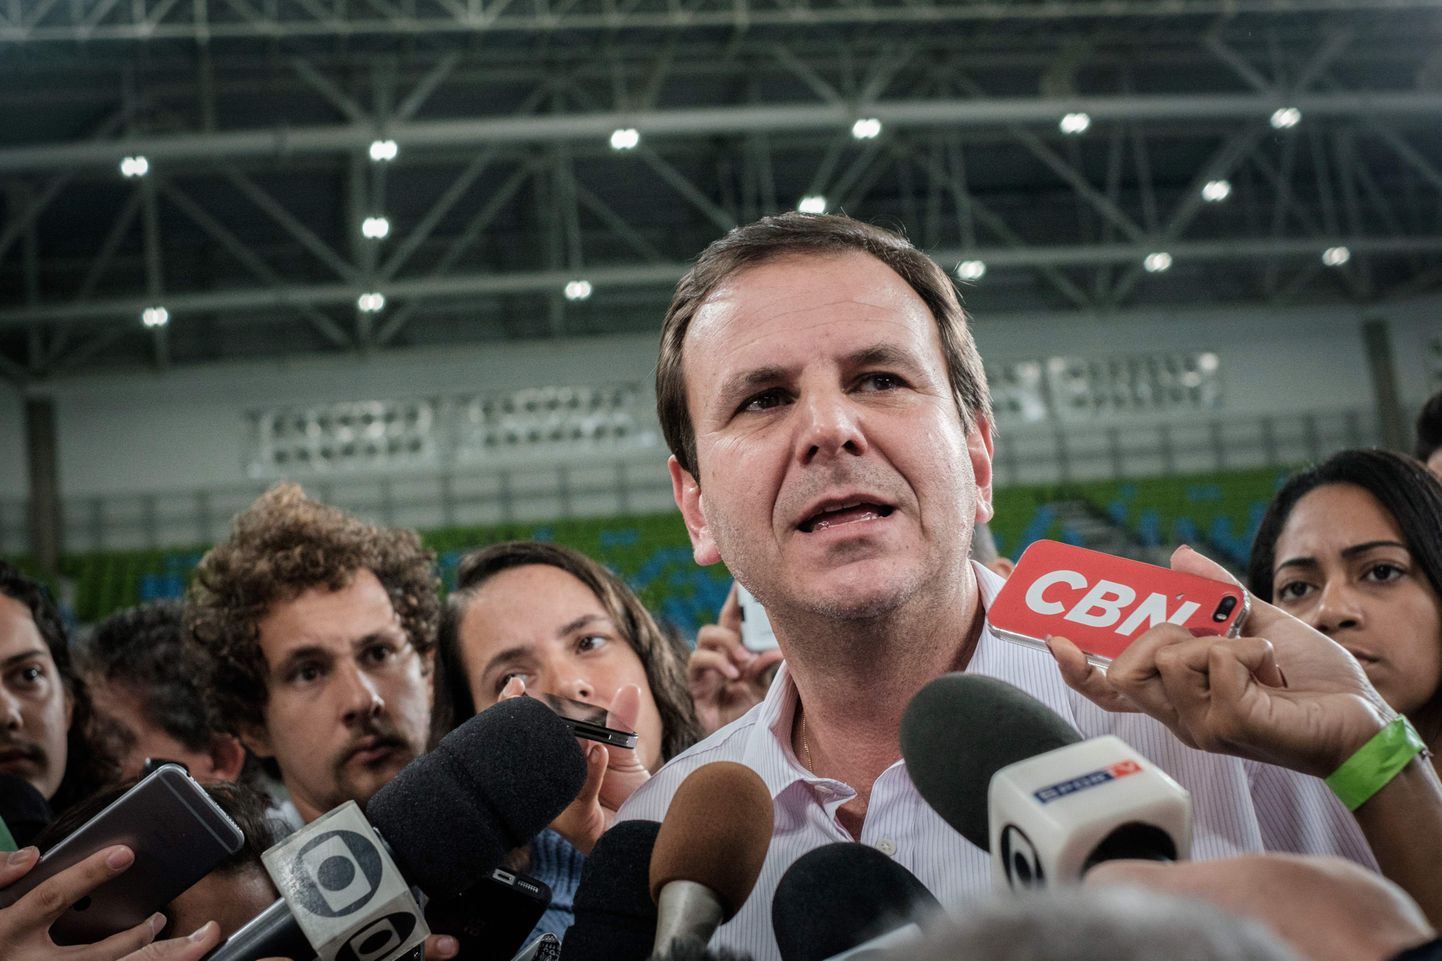 Rio de Janeiro's Mayor Eduardo Paes speaks to the press during the inauguration of the Carioca Arena 2 at the Olympic Park in Rio de Janeiro, Brazil, on May 14, 2016.
The Carioca Arena 2 will host Judo and Wrestling competitions during the Rio 2016 Olympic games and Bocha during the Paralympic games. / AFP PHOTO / YASUYOSHI CHIBA